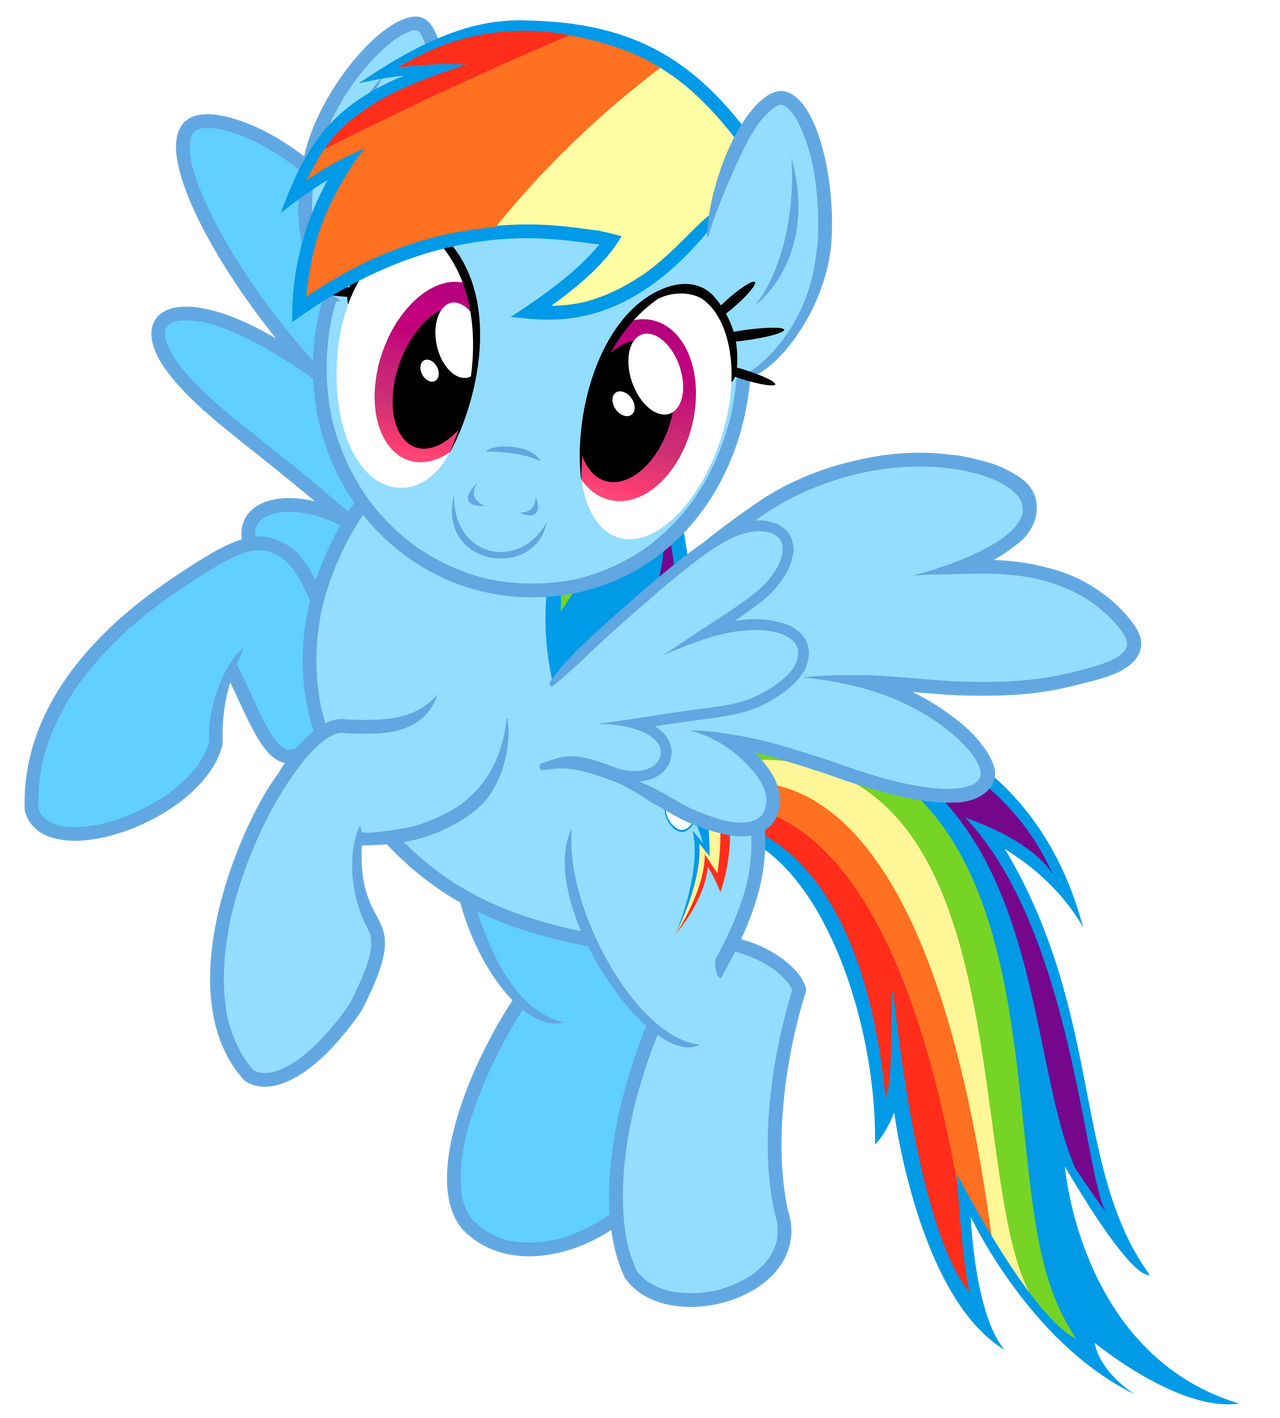 Rainbow Dash From My Little Pony Friendship Is Mag by SoffiMB on